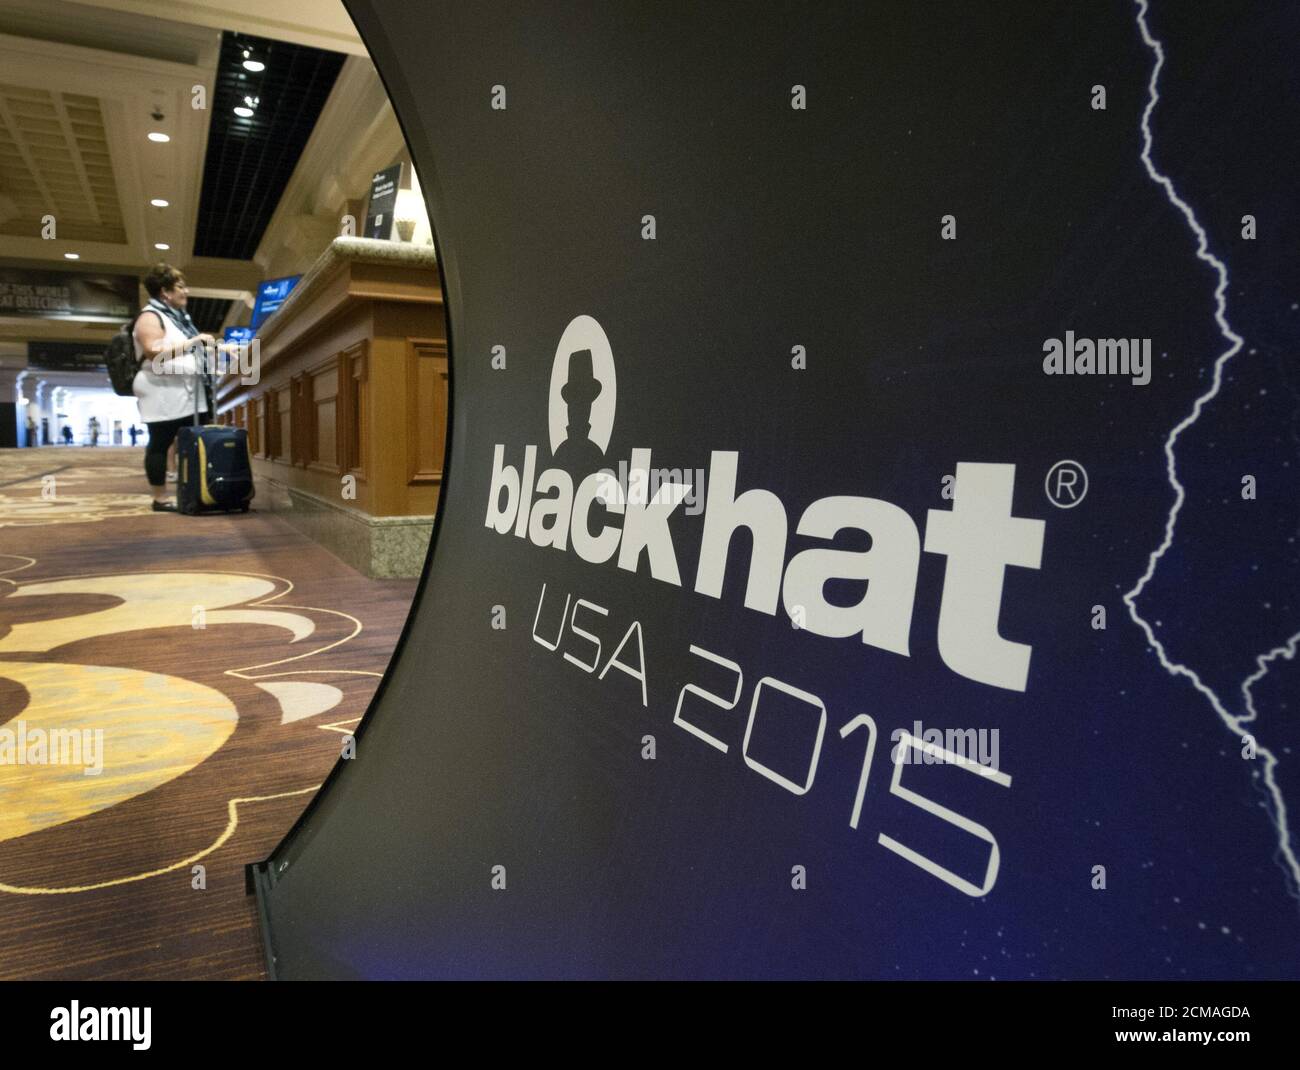 A woman checks in at a sponsor desk during the Black Hat USA 2015 cyber security conference in Las Vegas, Nevada August 4, 2015. REUTERS/ STEVE MARCUS Stock Photo